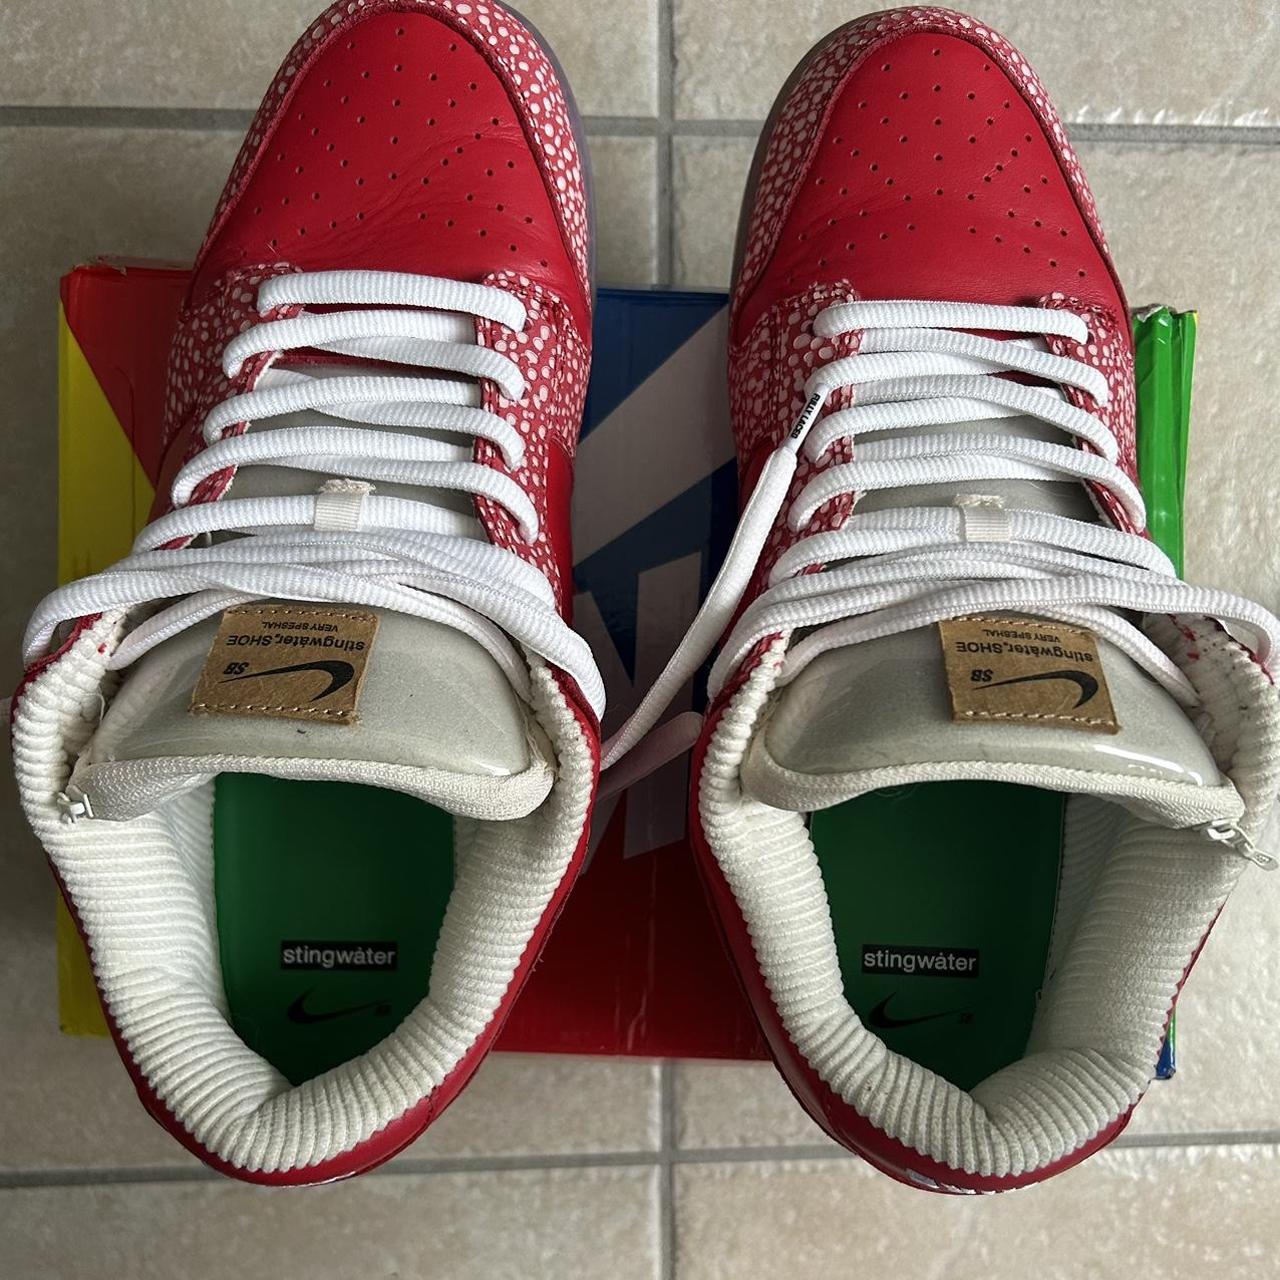 Nike Men's Red and White Trainers | Depop